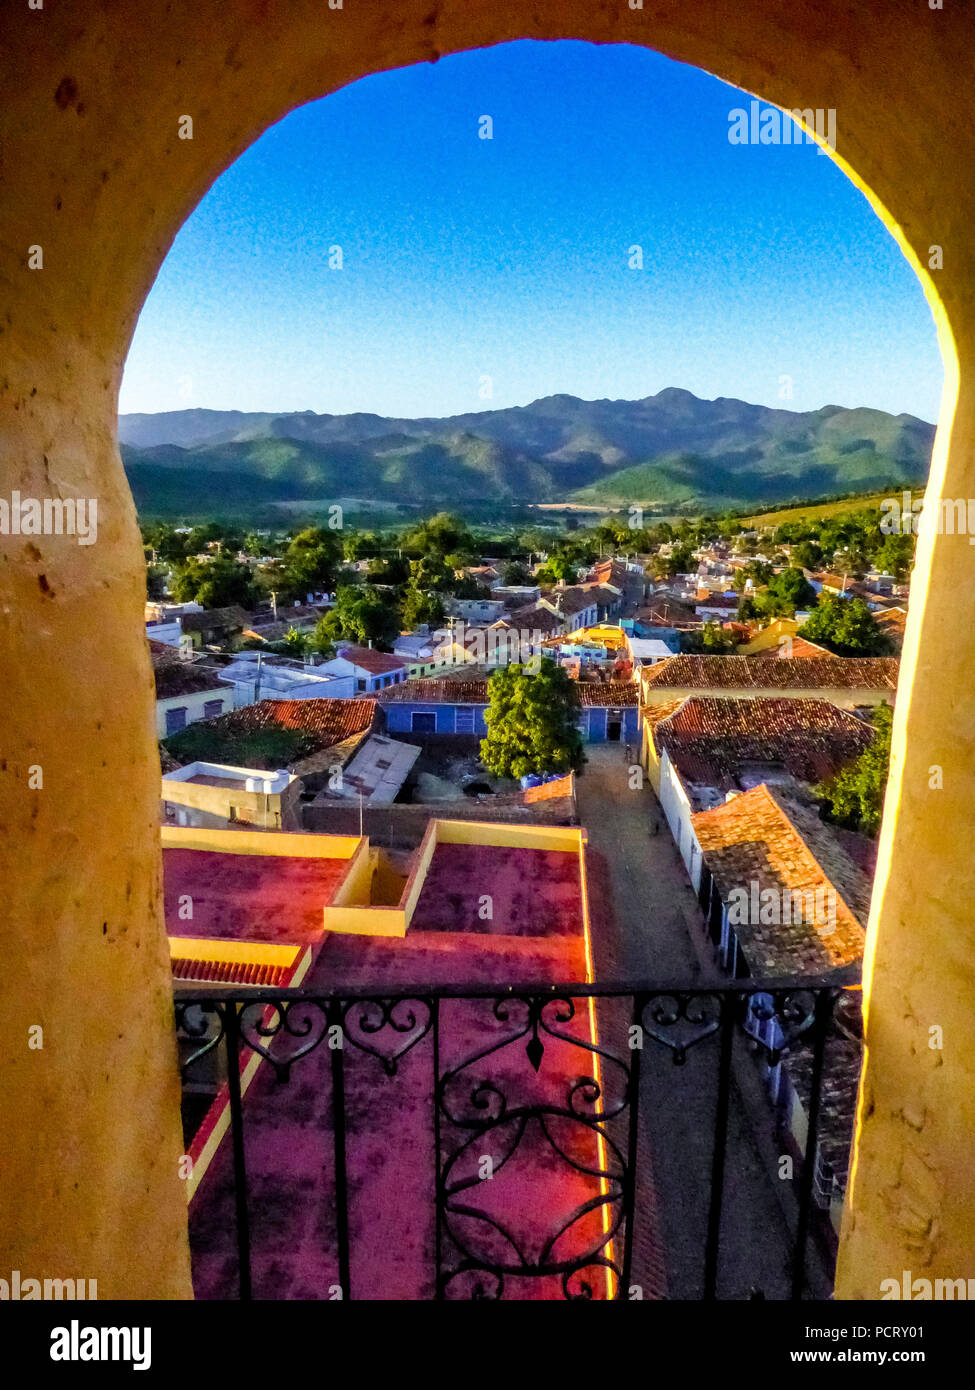 View from the bell tower of the Convent of San Francisco de Asis church over the city of Trinidad, Cuba, Stock Photo